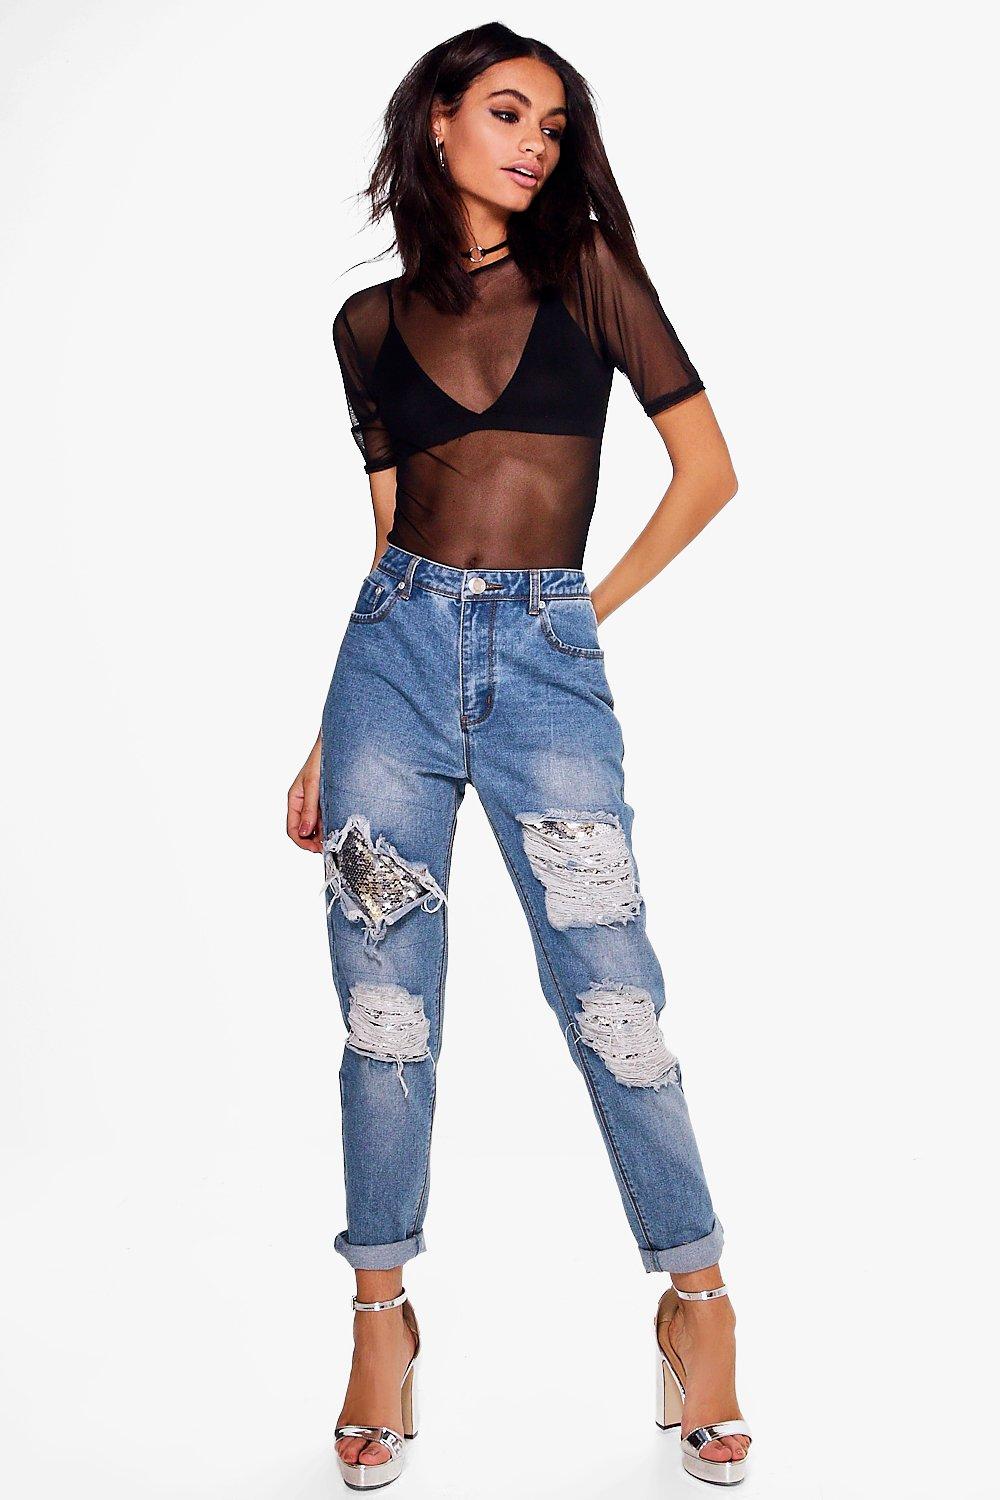 Boyfriend jeans are something different